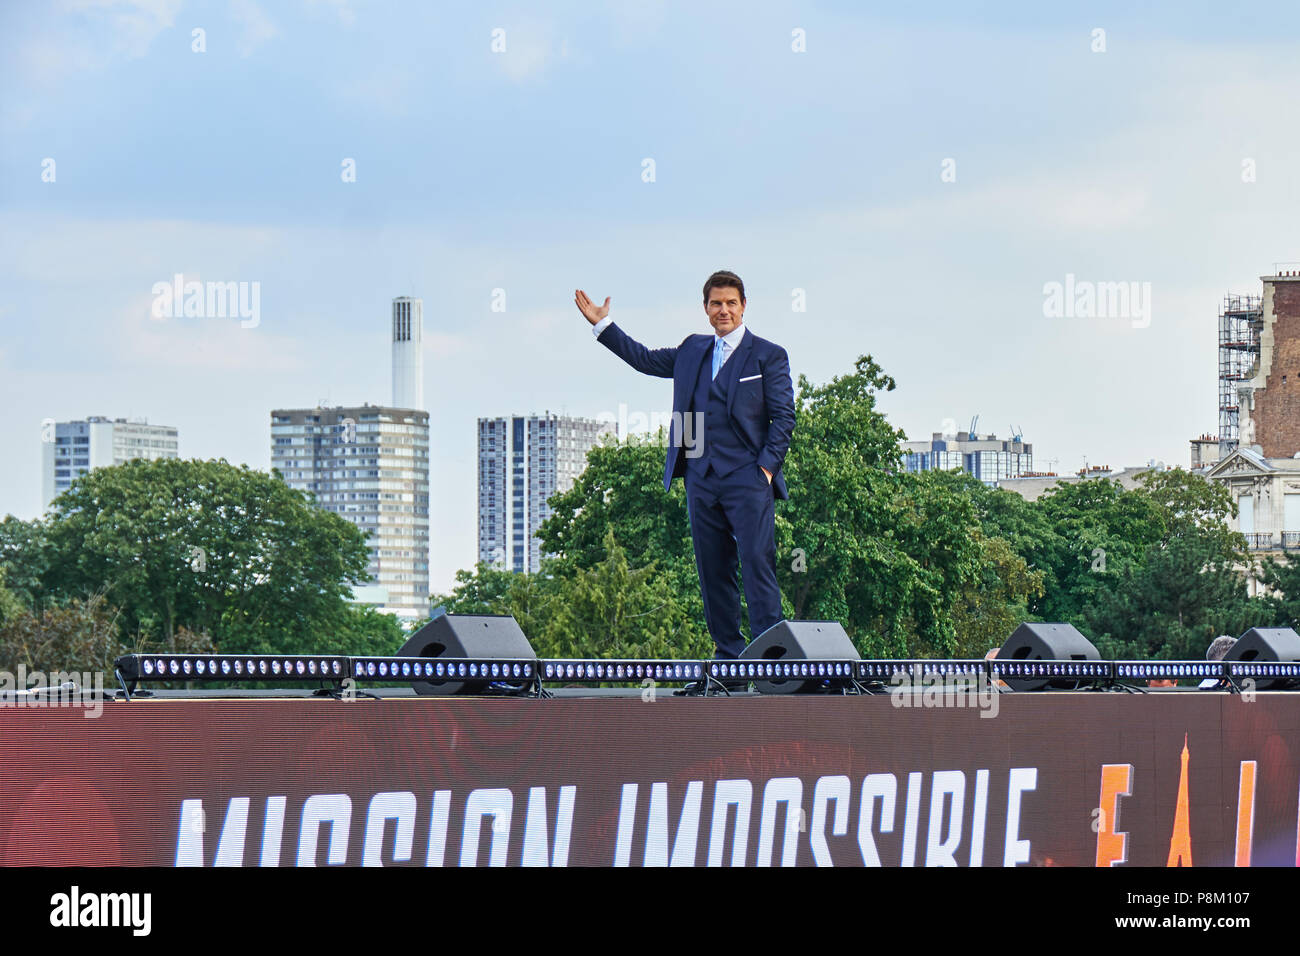 Paris, France. 12 July 2018. Tom Cruise at the Mission: Impossible - Fallout World Premier red carpet. Credit: Calvin Tan/Alamy Live News Stock Photo